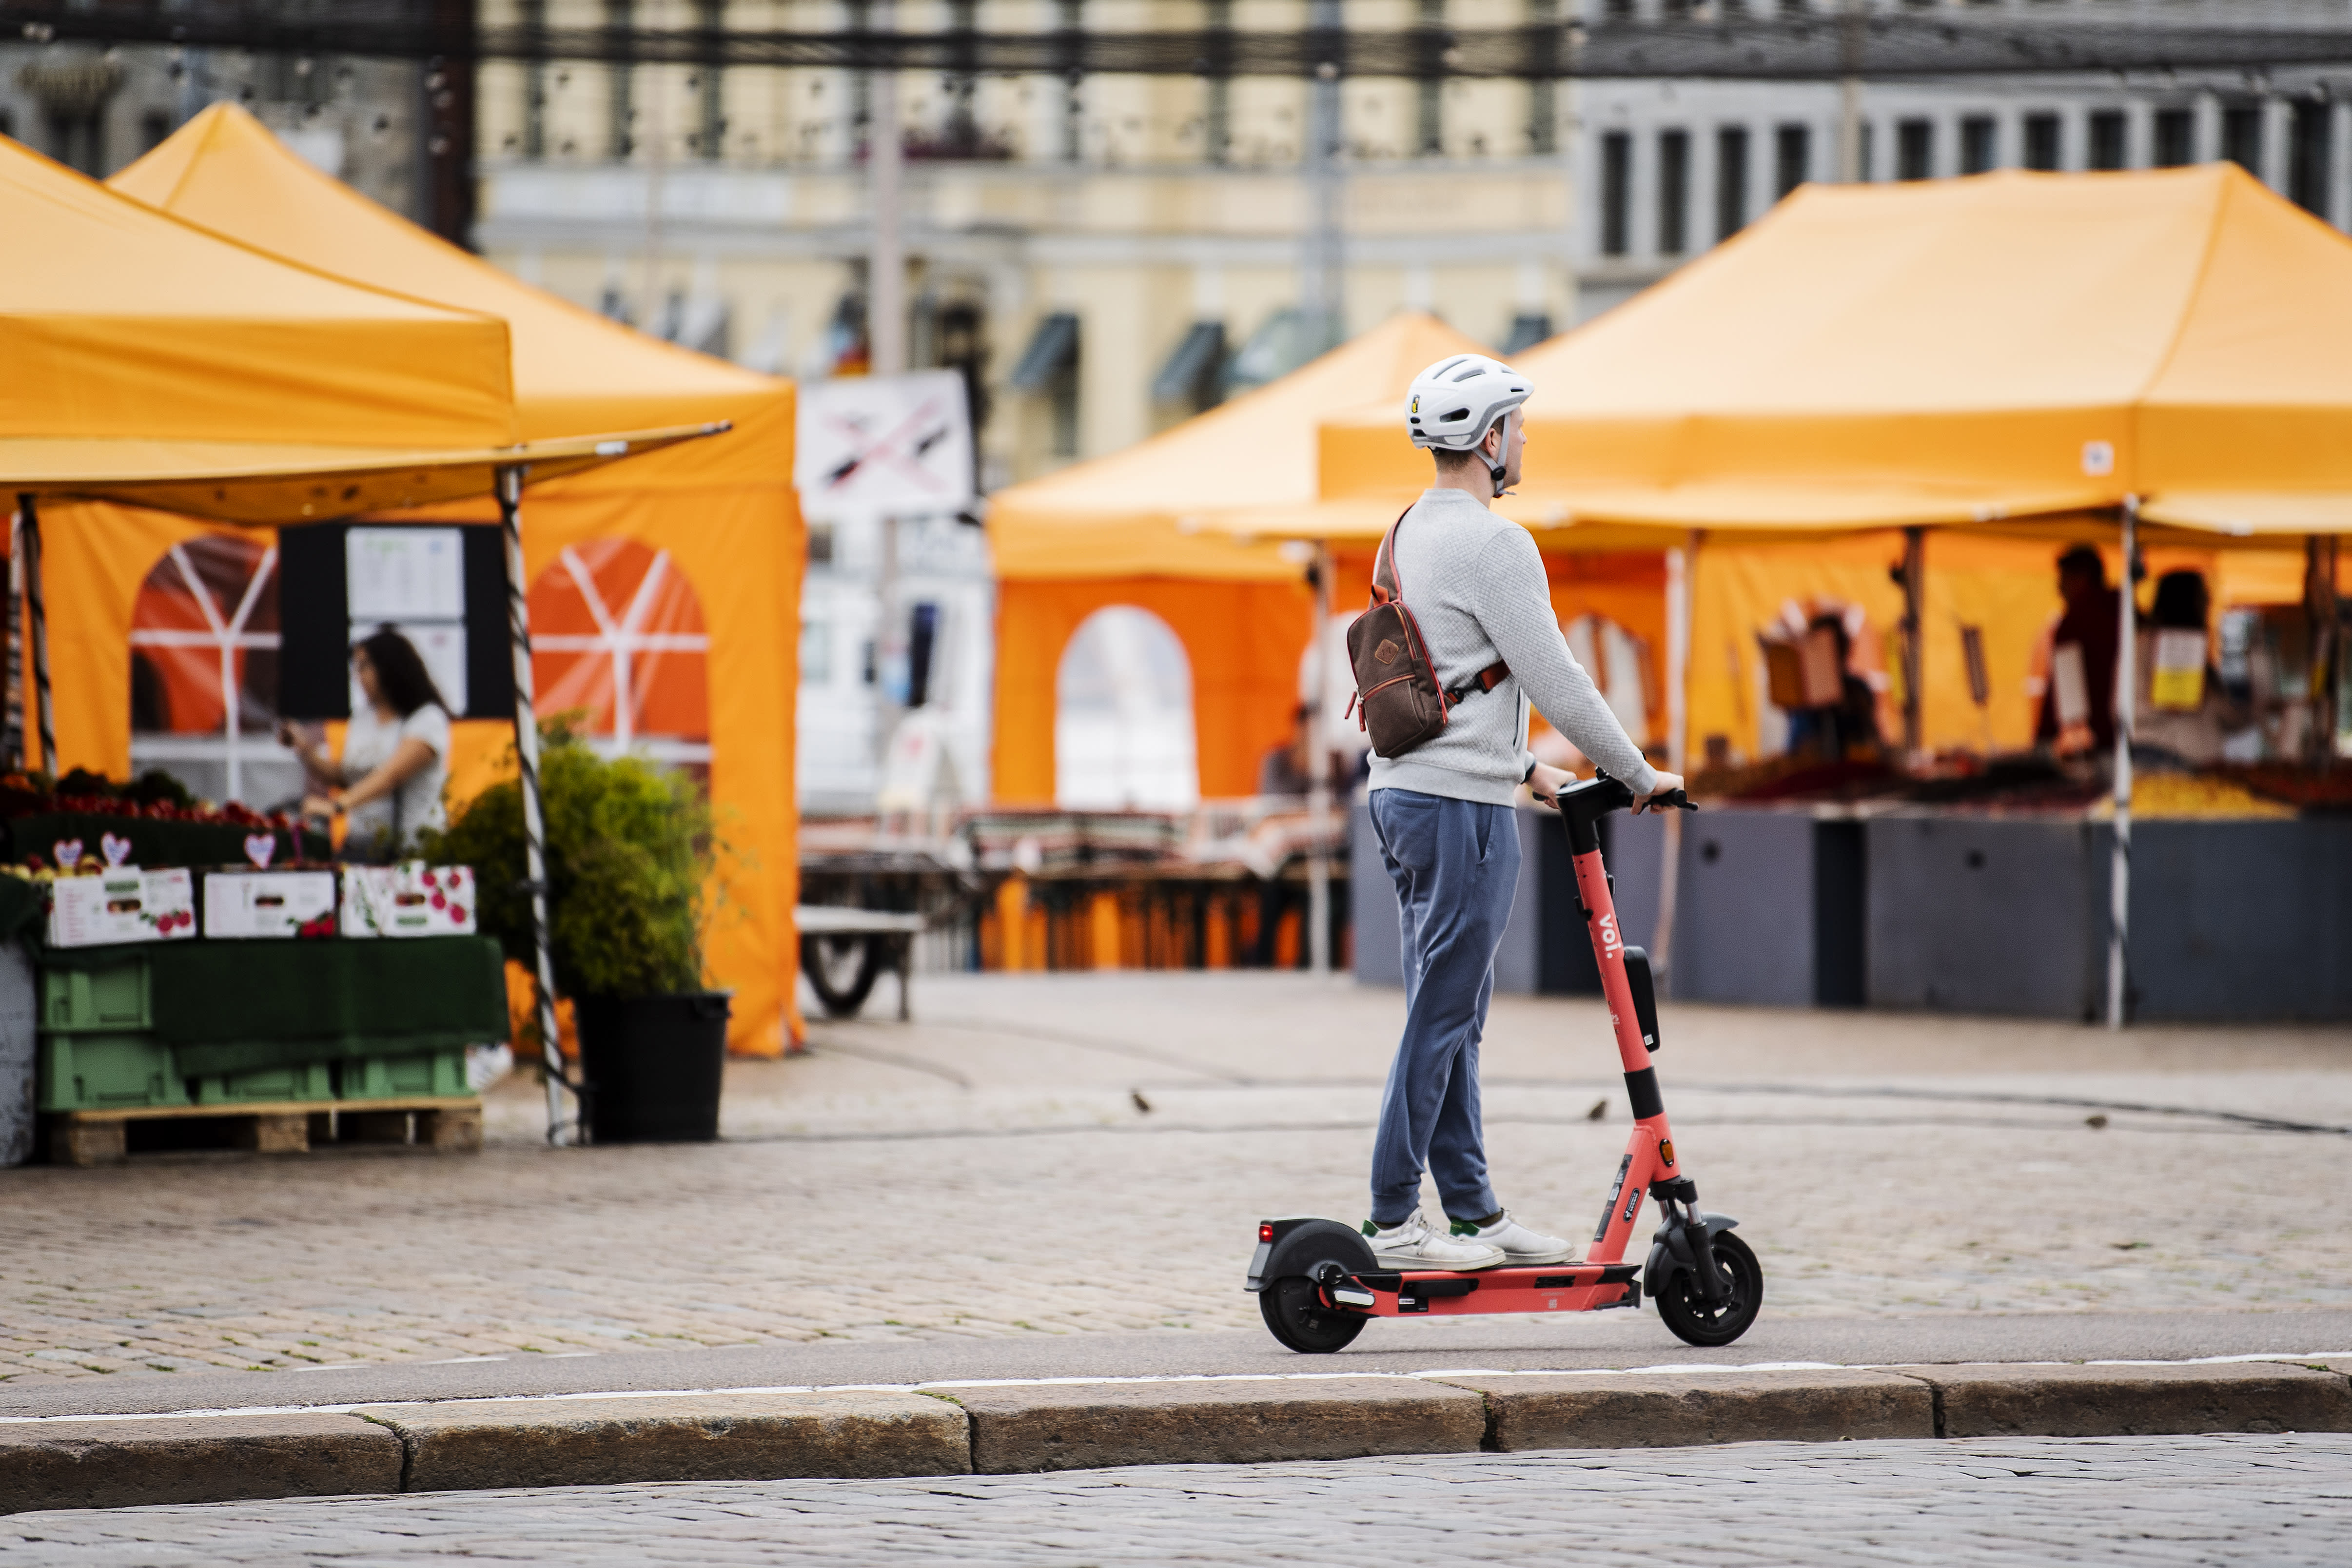 Research: In Helsinki’s electric scooter accidents, half of the drivers were drunk